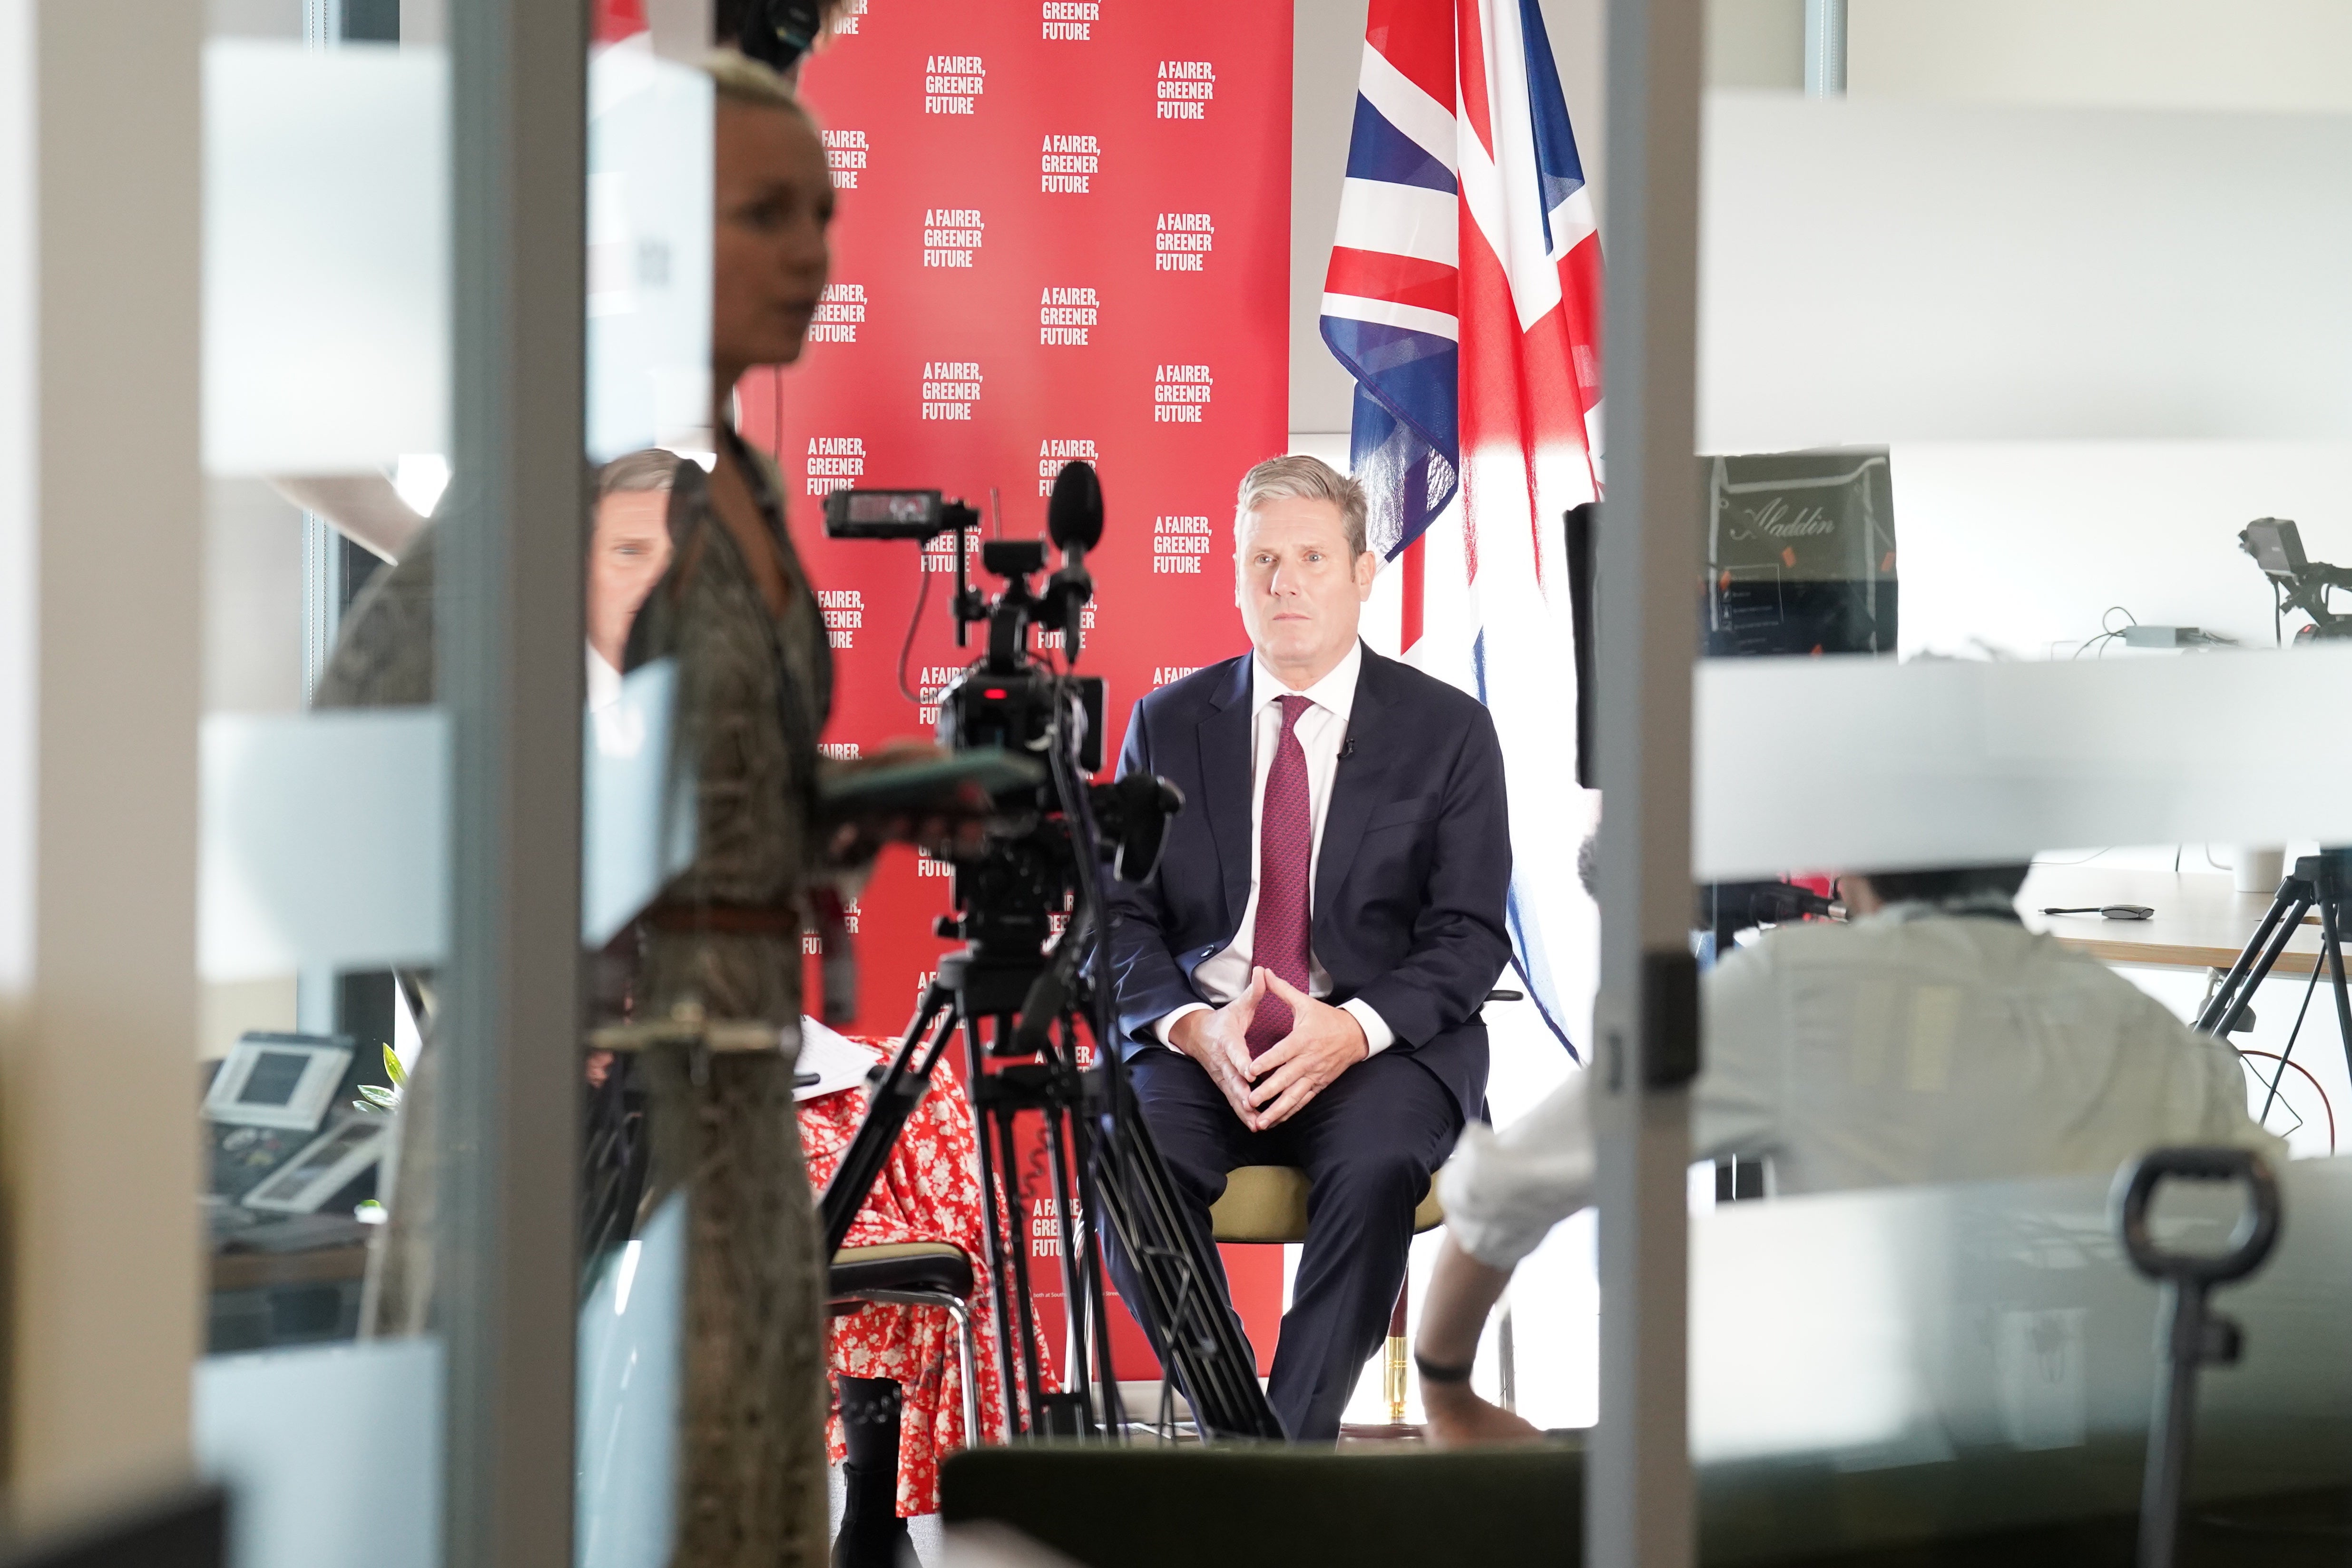 Labour leader Sir Keir Starmer doing a TV interview at the party conference at the ACC Liverpool (Stefan Rousseau/PA)